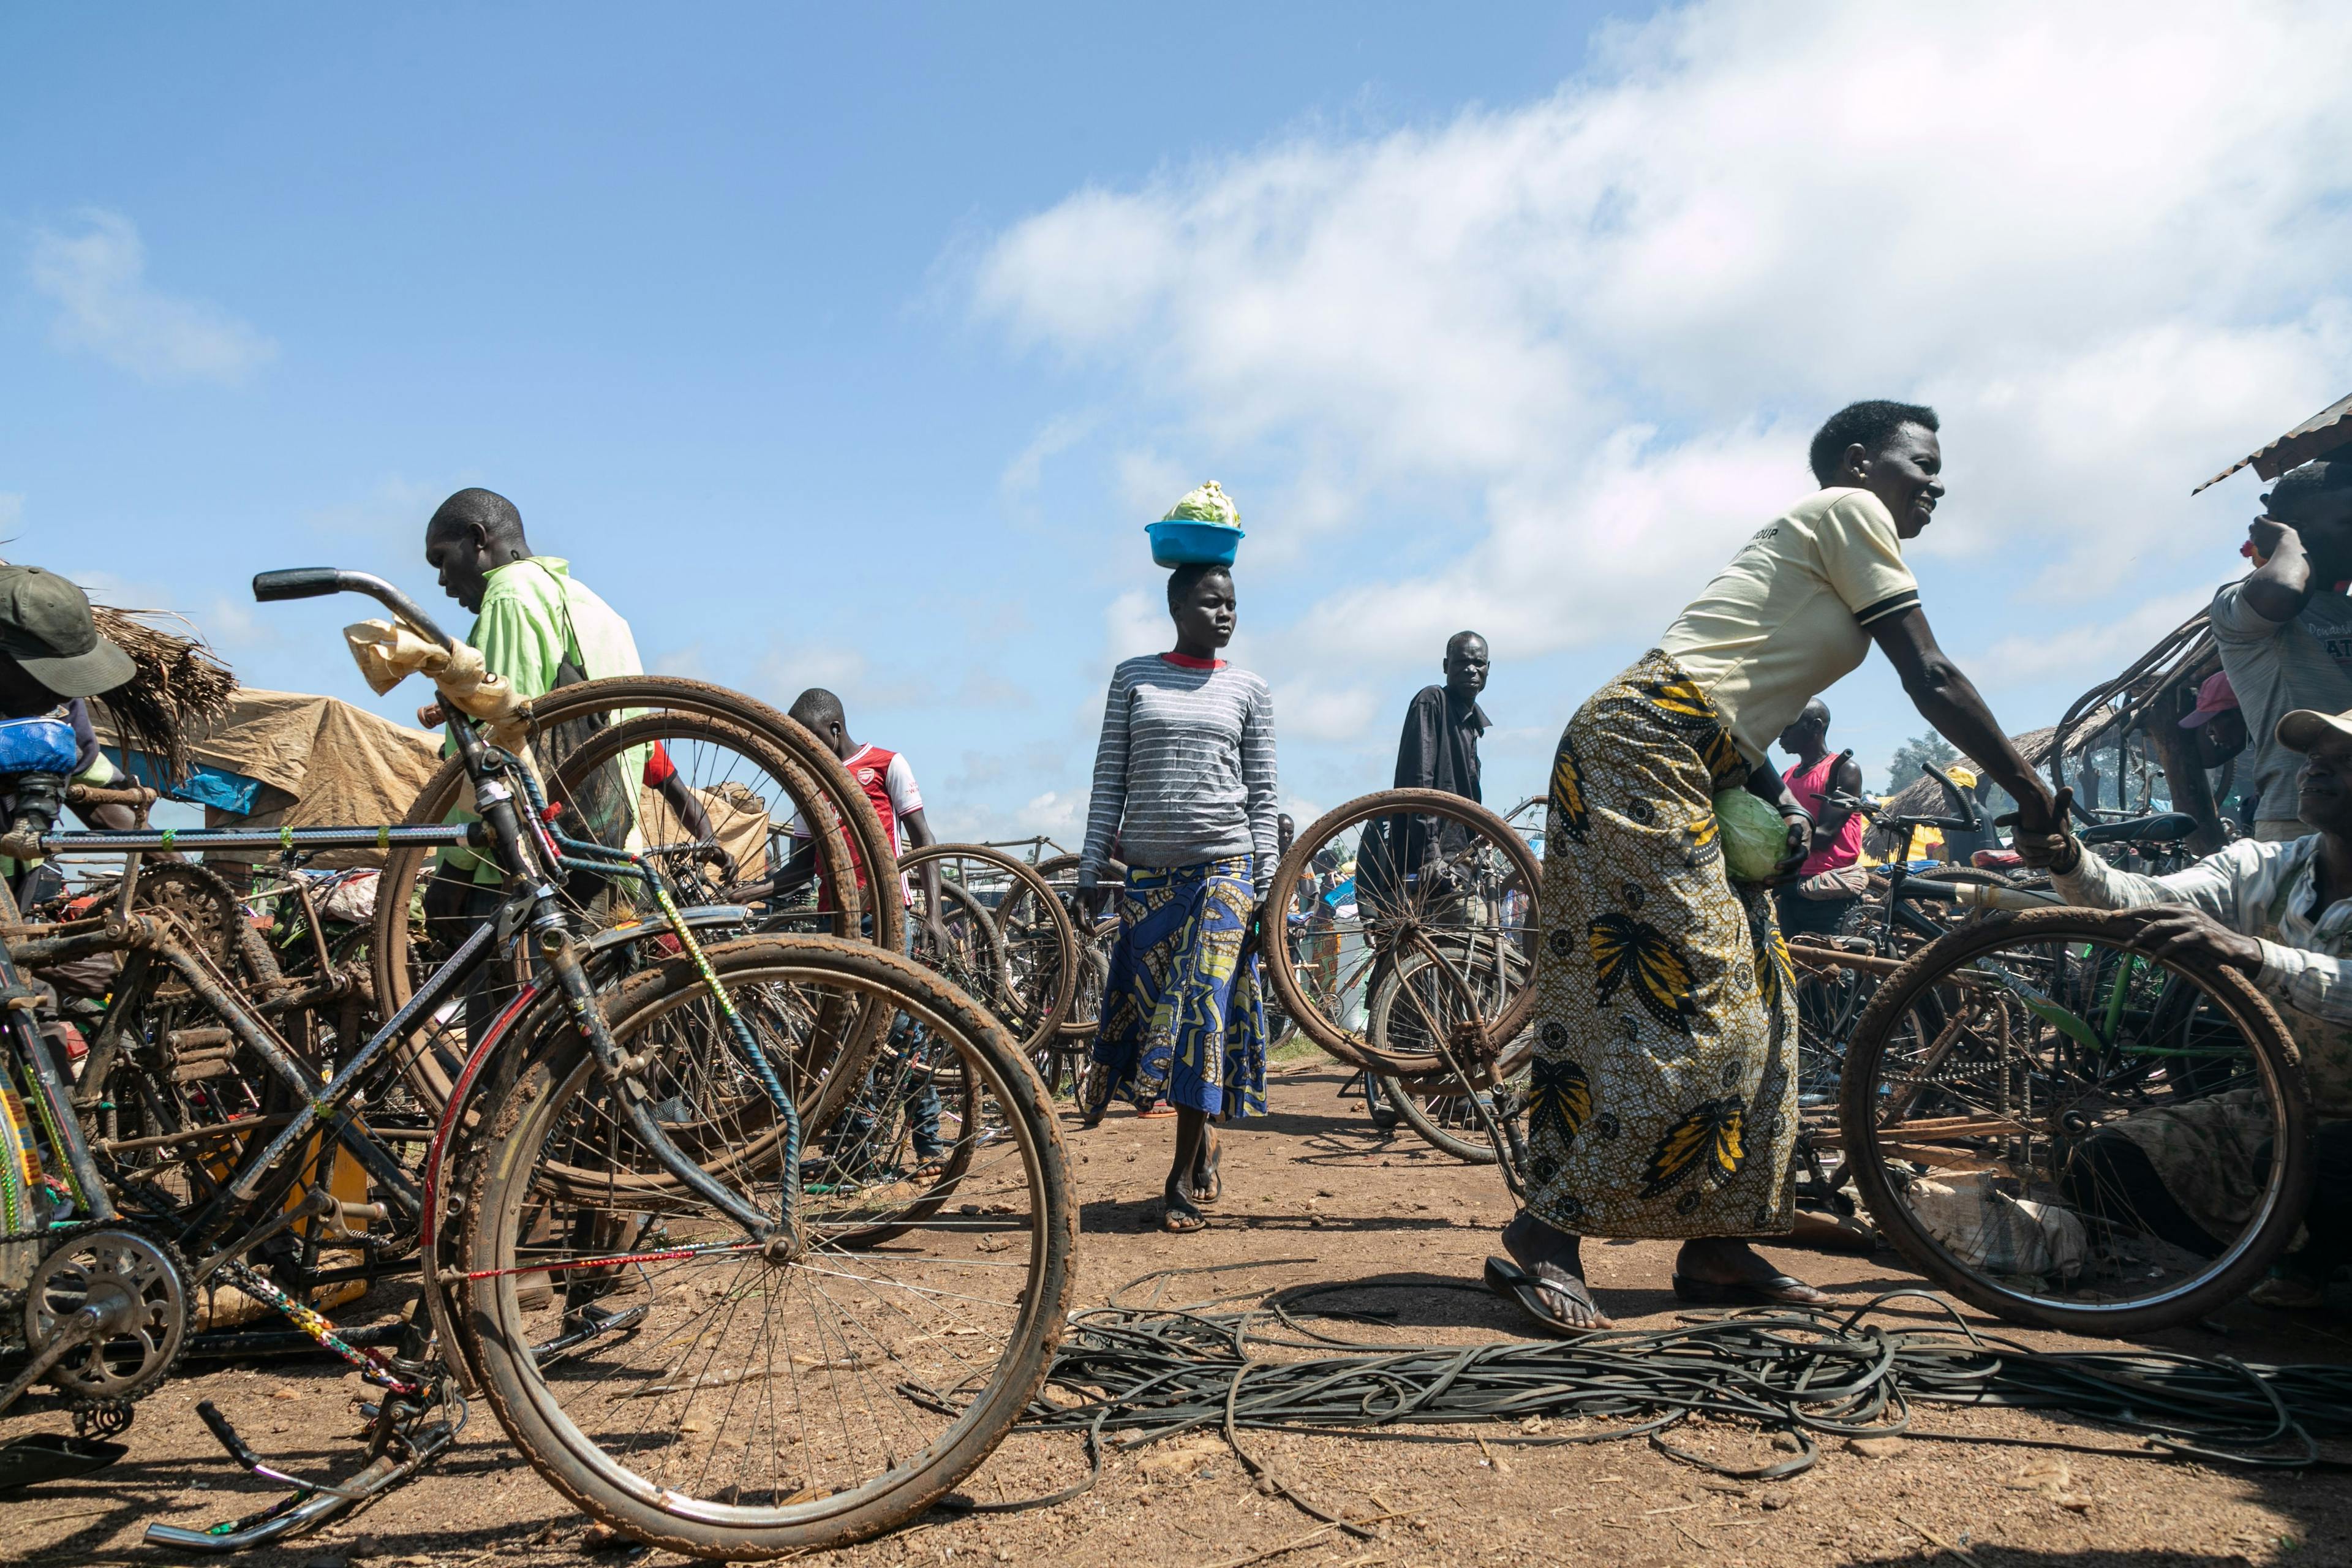 ‘The Africa we want’: a shared vision. This bicycle repair shop at a key regional produce market shows how a local economy can thrive by embracing trade and mobility. By planning for climate mobility as a way of fostering resilient adaptation journeys, African states can advance the promise of regional integration and prosperity.